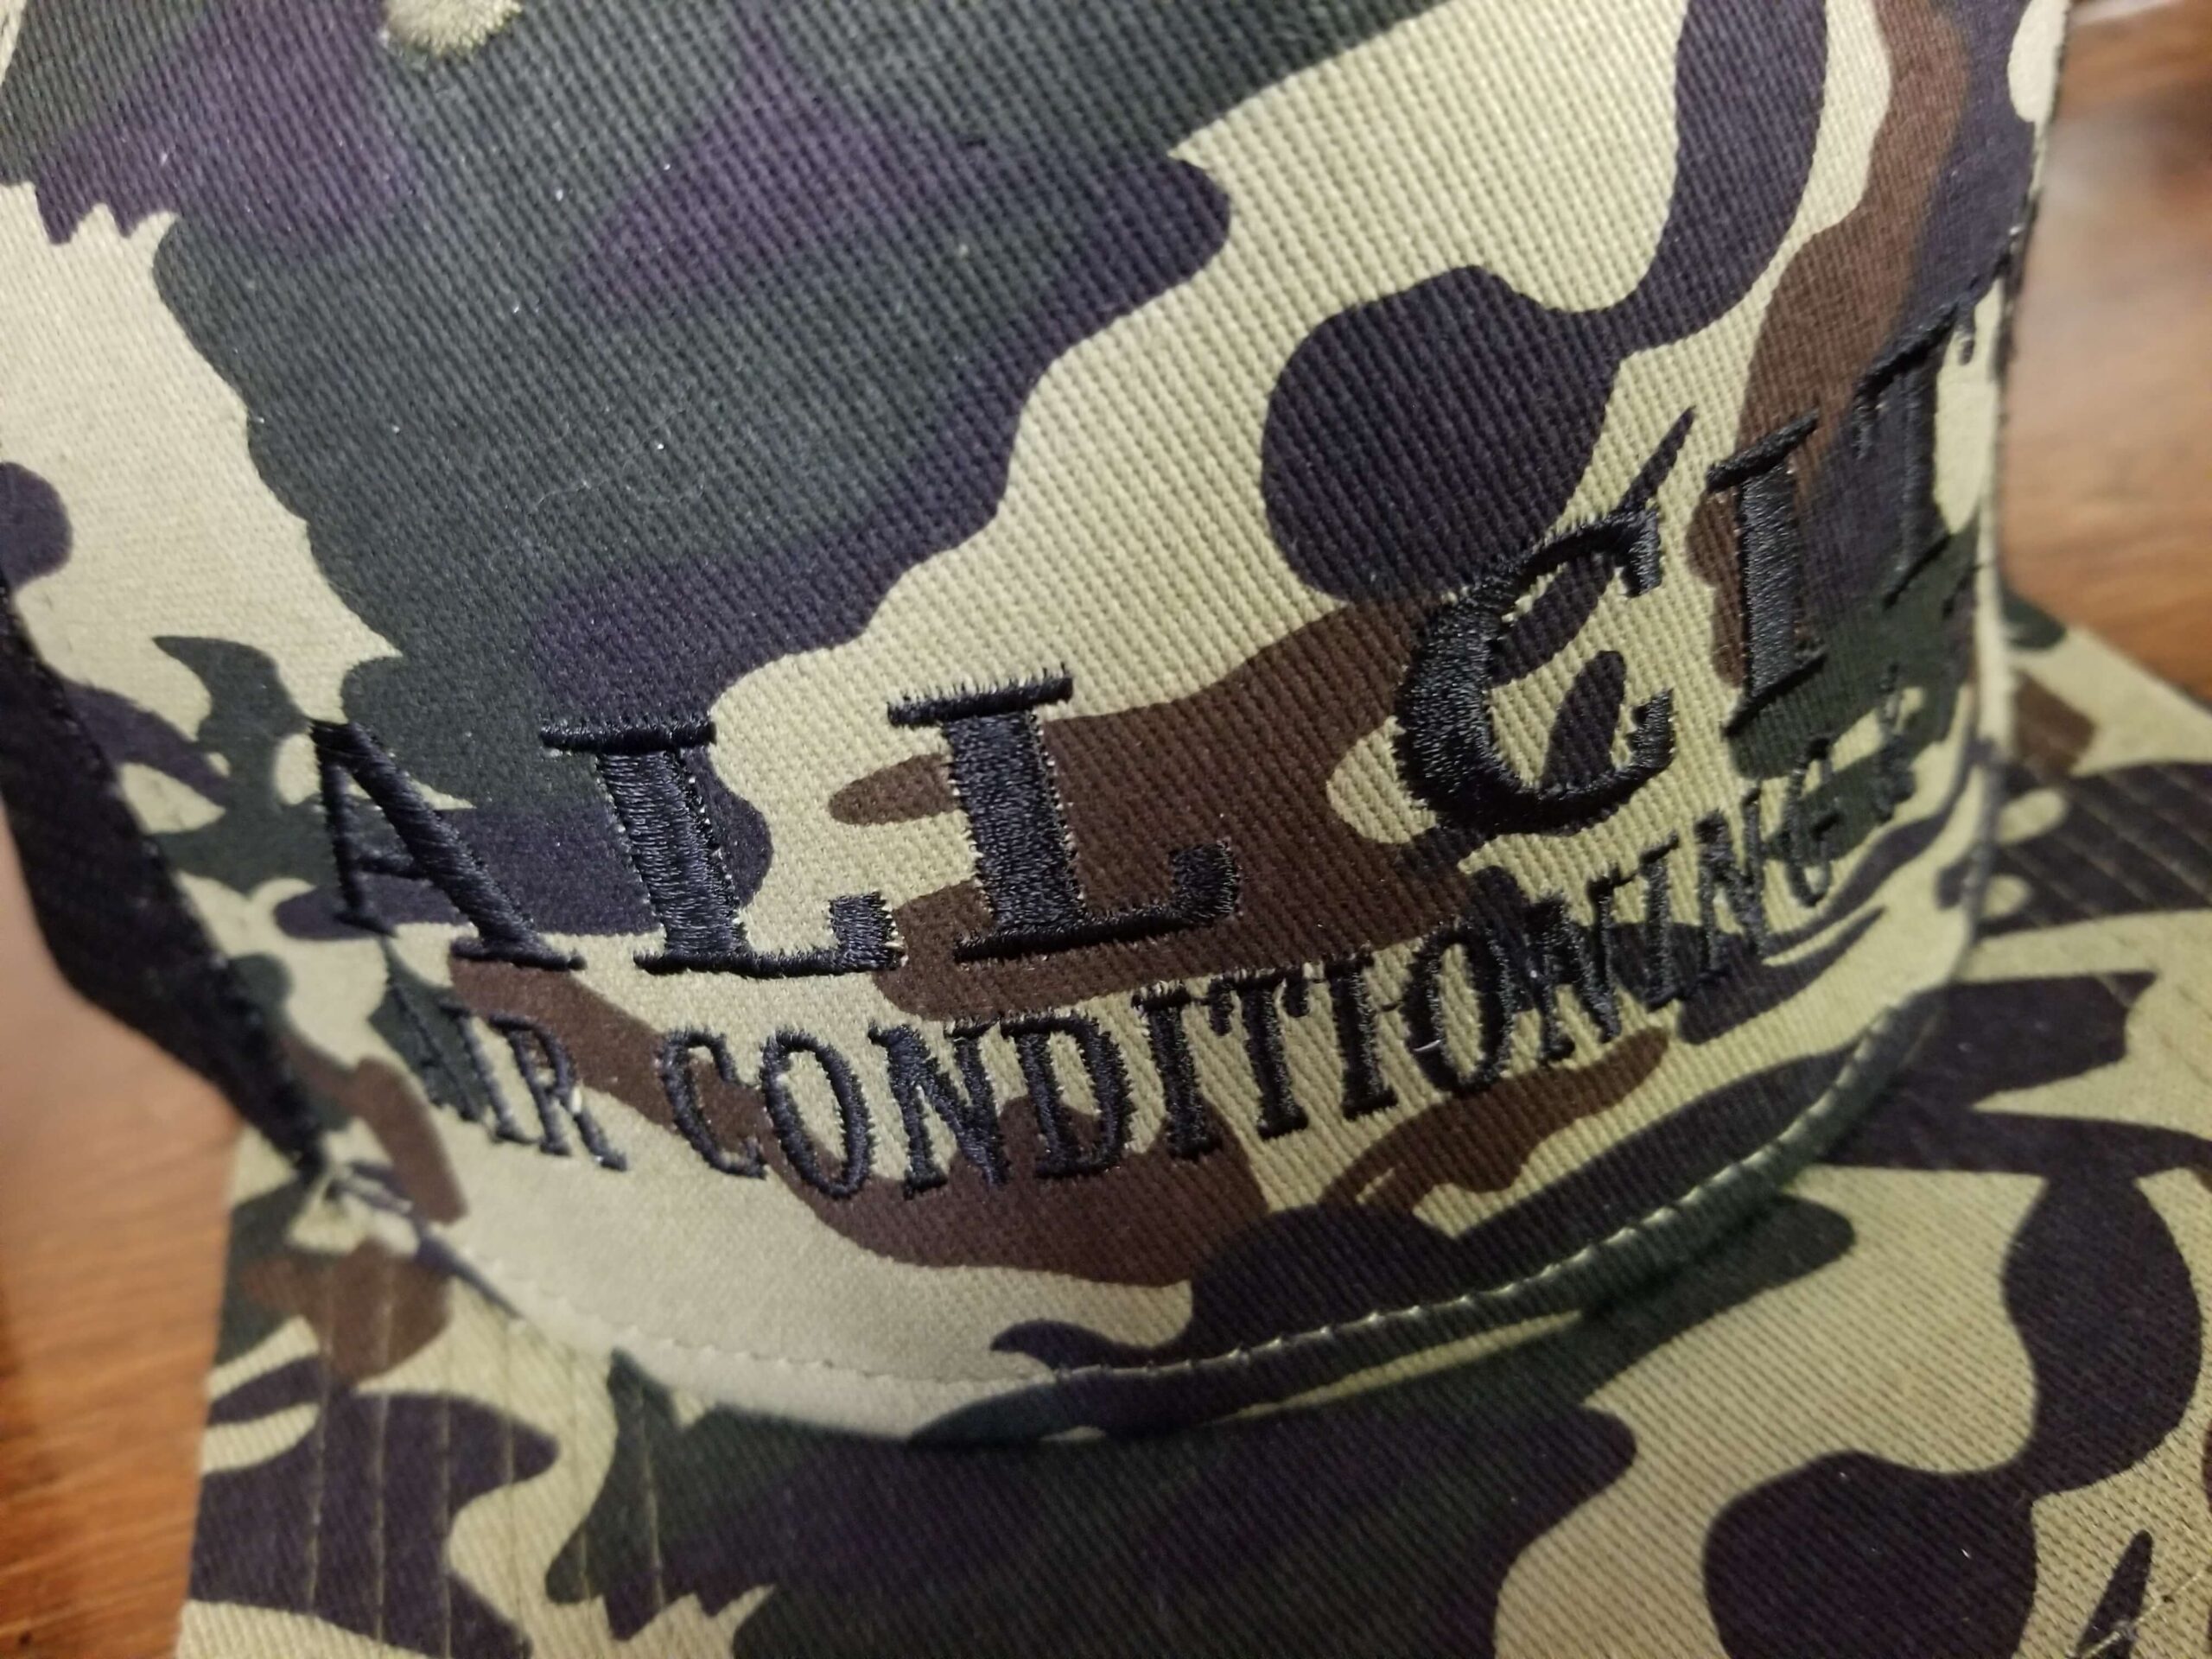 Custom Apparel embroidered name on hat